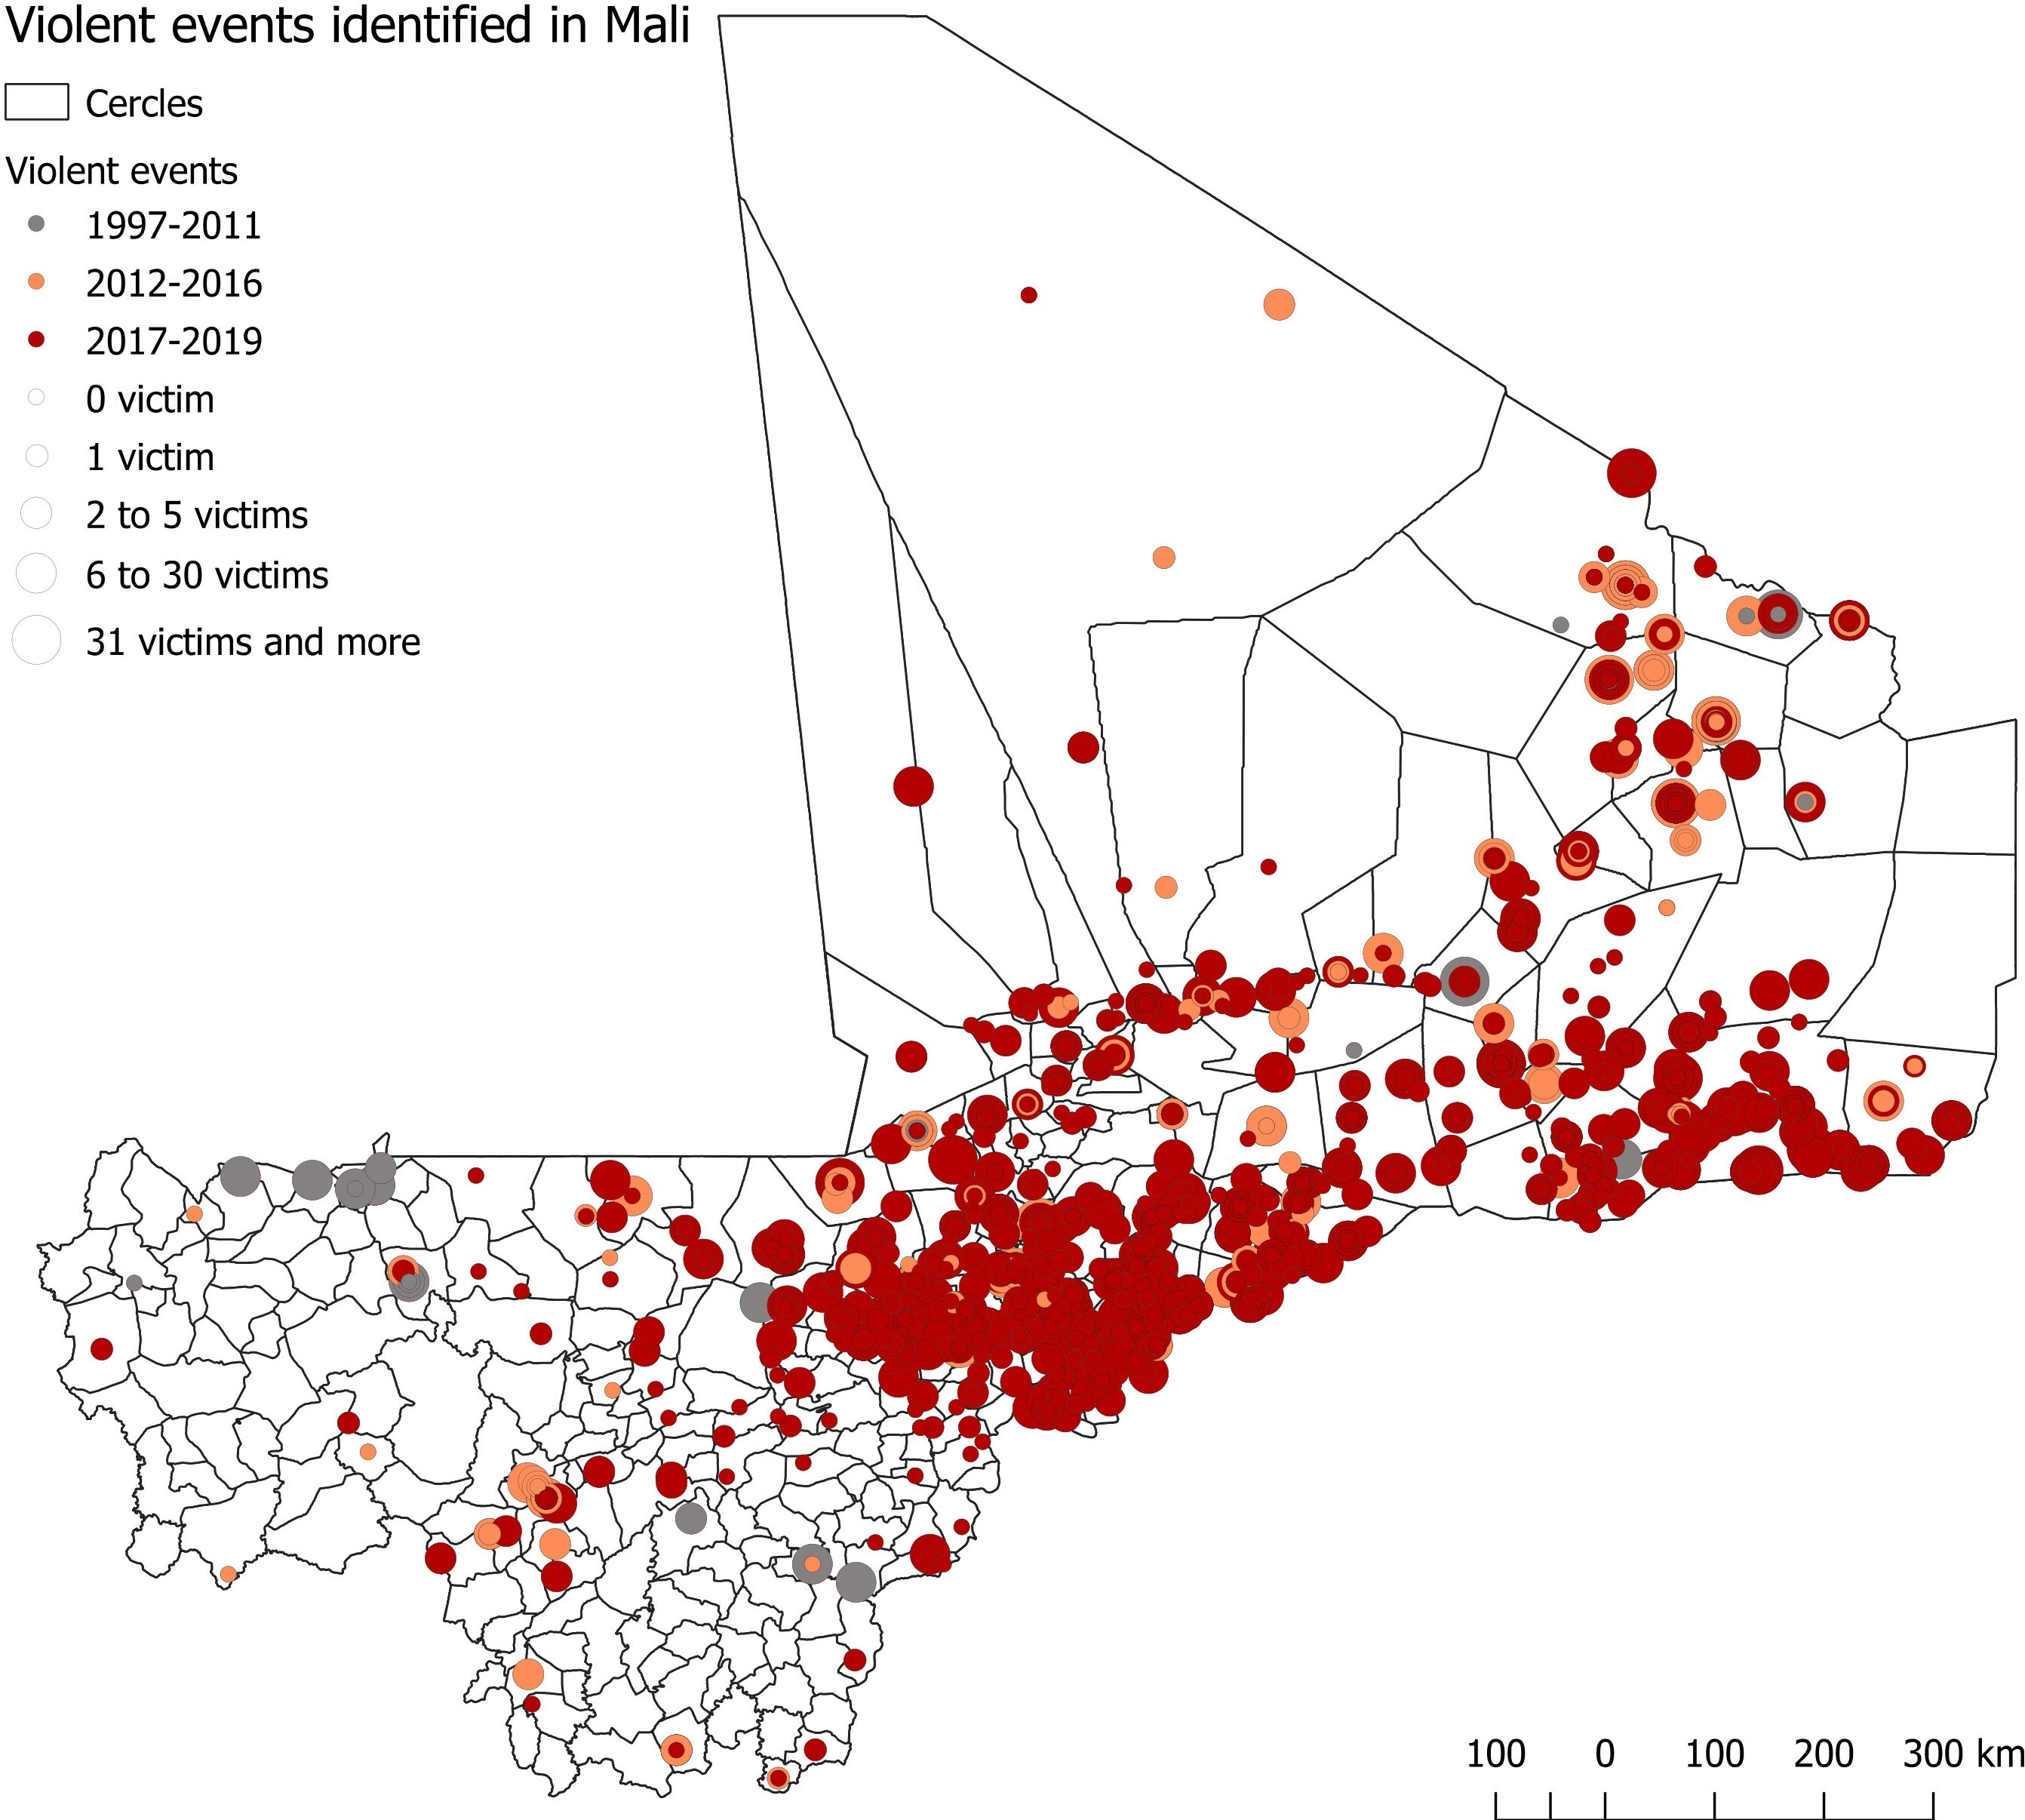 Spatial and temporal dynamic of conflict events identified in mali between 1997 and 2019. Sources: ACLED, 1997–2019, produced by Thomas Calvo. Notes: Violent events include battles, violence against civilians and remote violence.